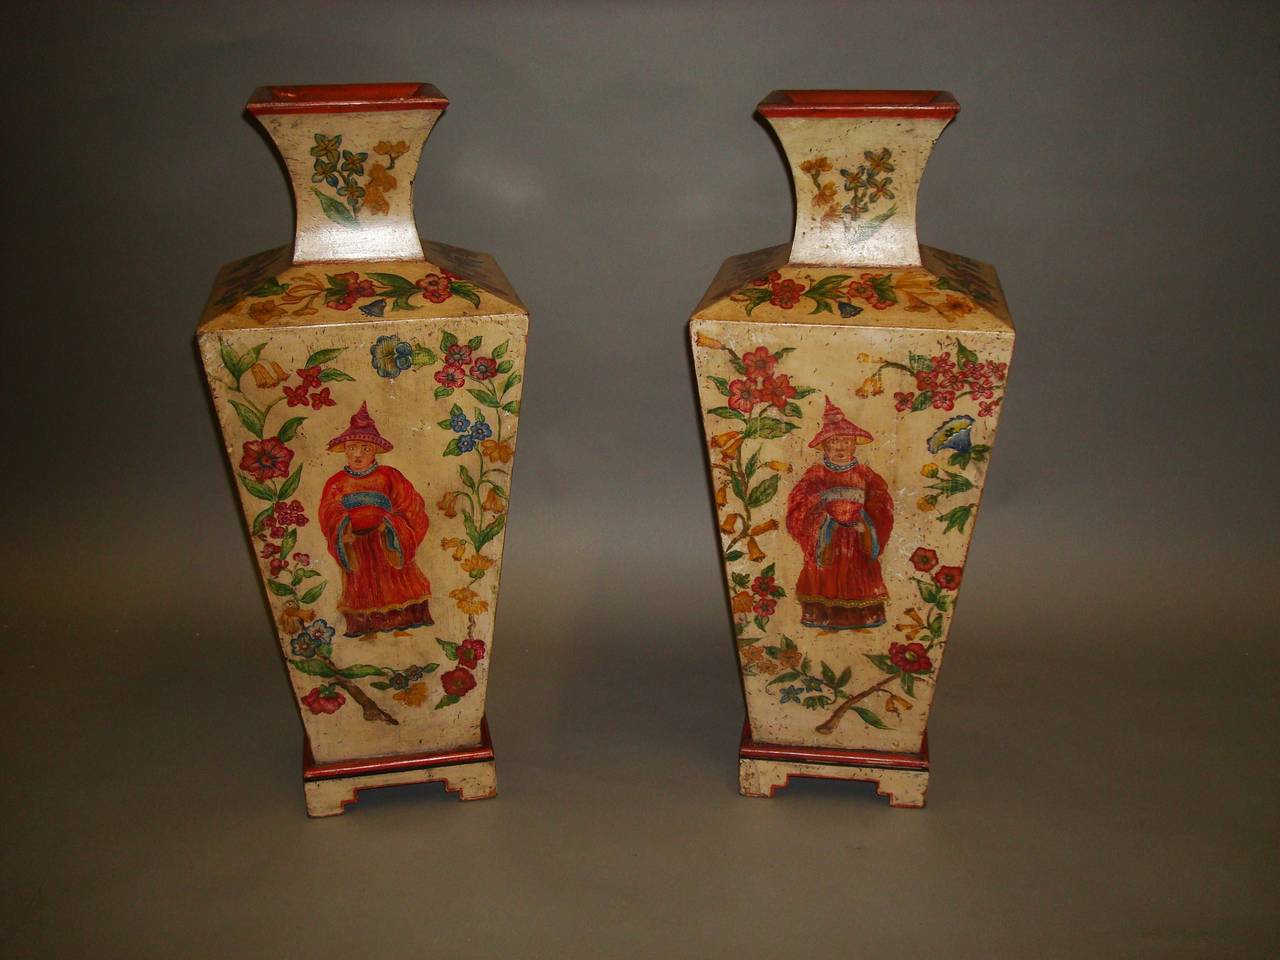 Early 20th century decorative pair of large painted pine vases; the flaired neck above the square tapering body profusely decorated with brightly painted trailing flowers and foliage on an ivory coloured background, each panel depicting a different